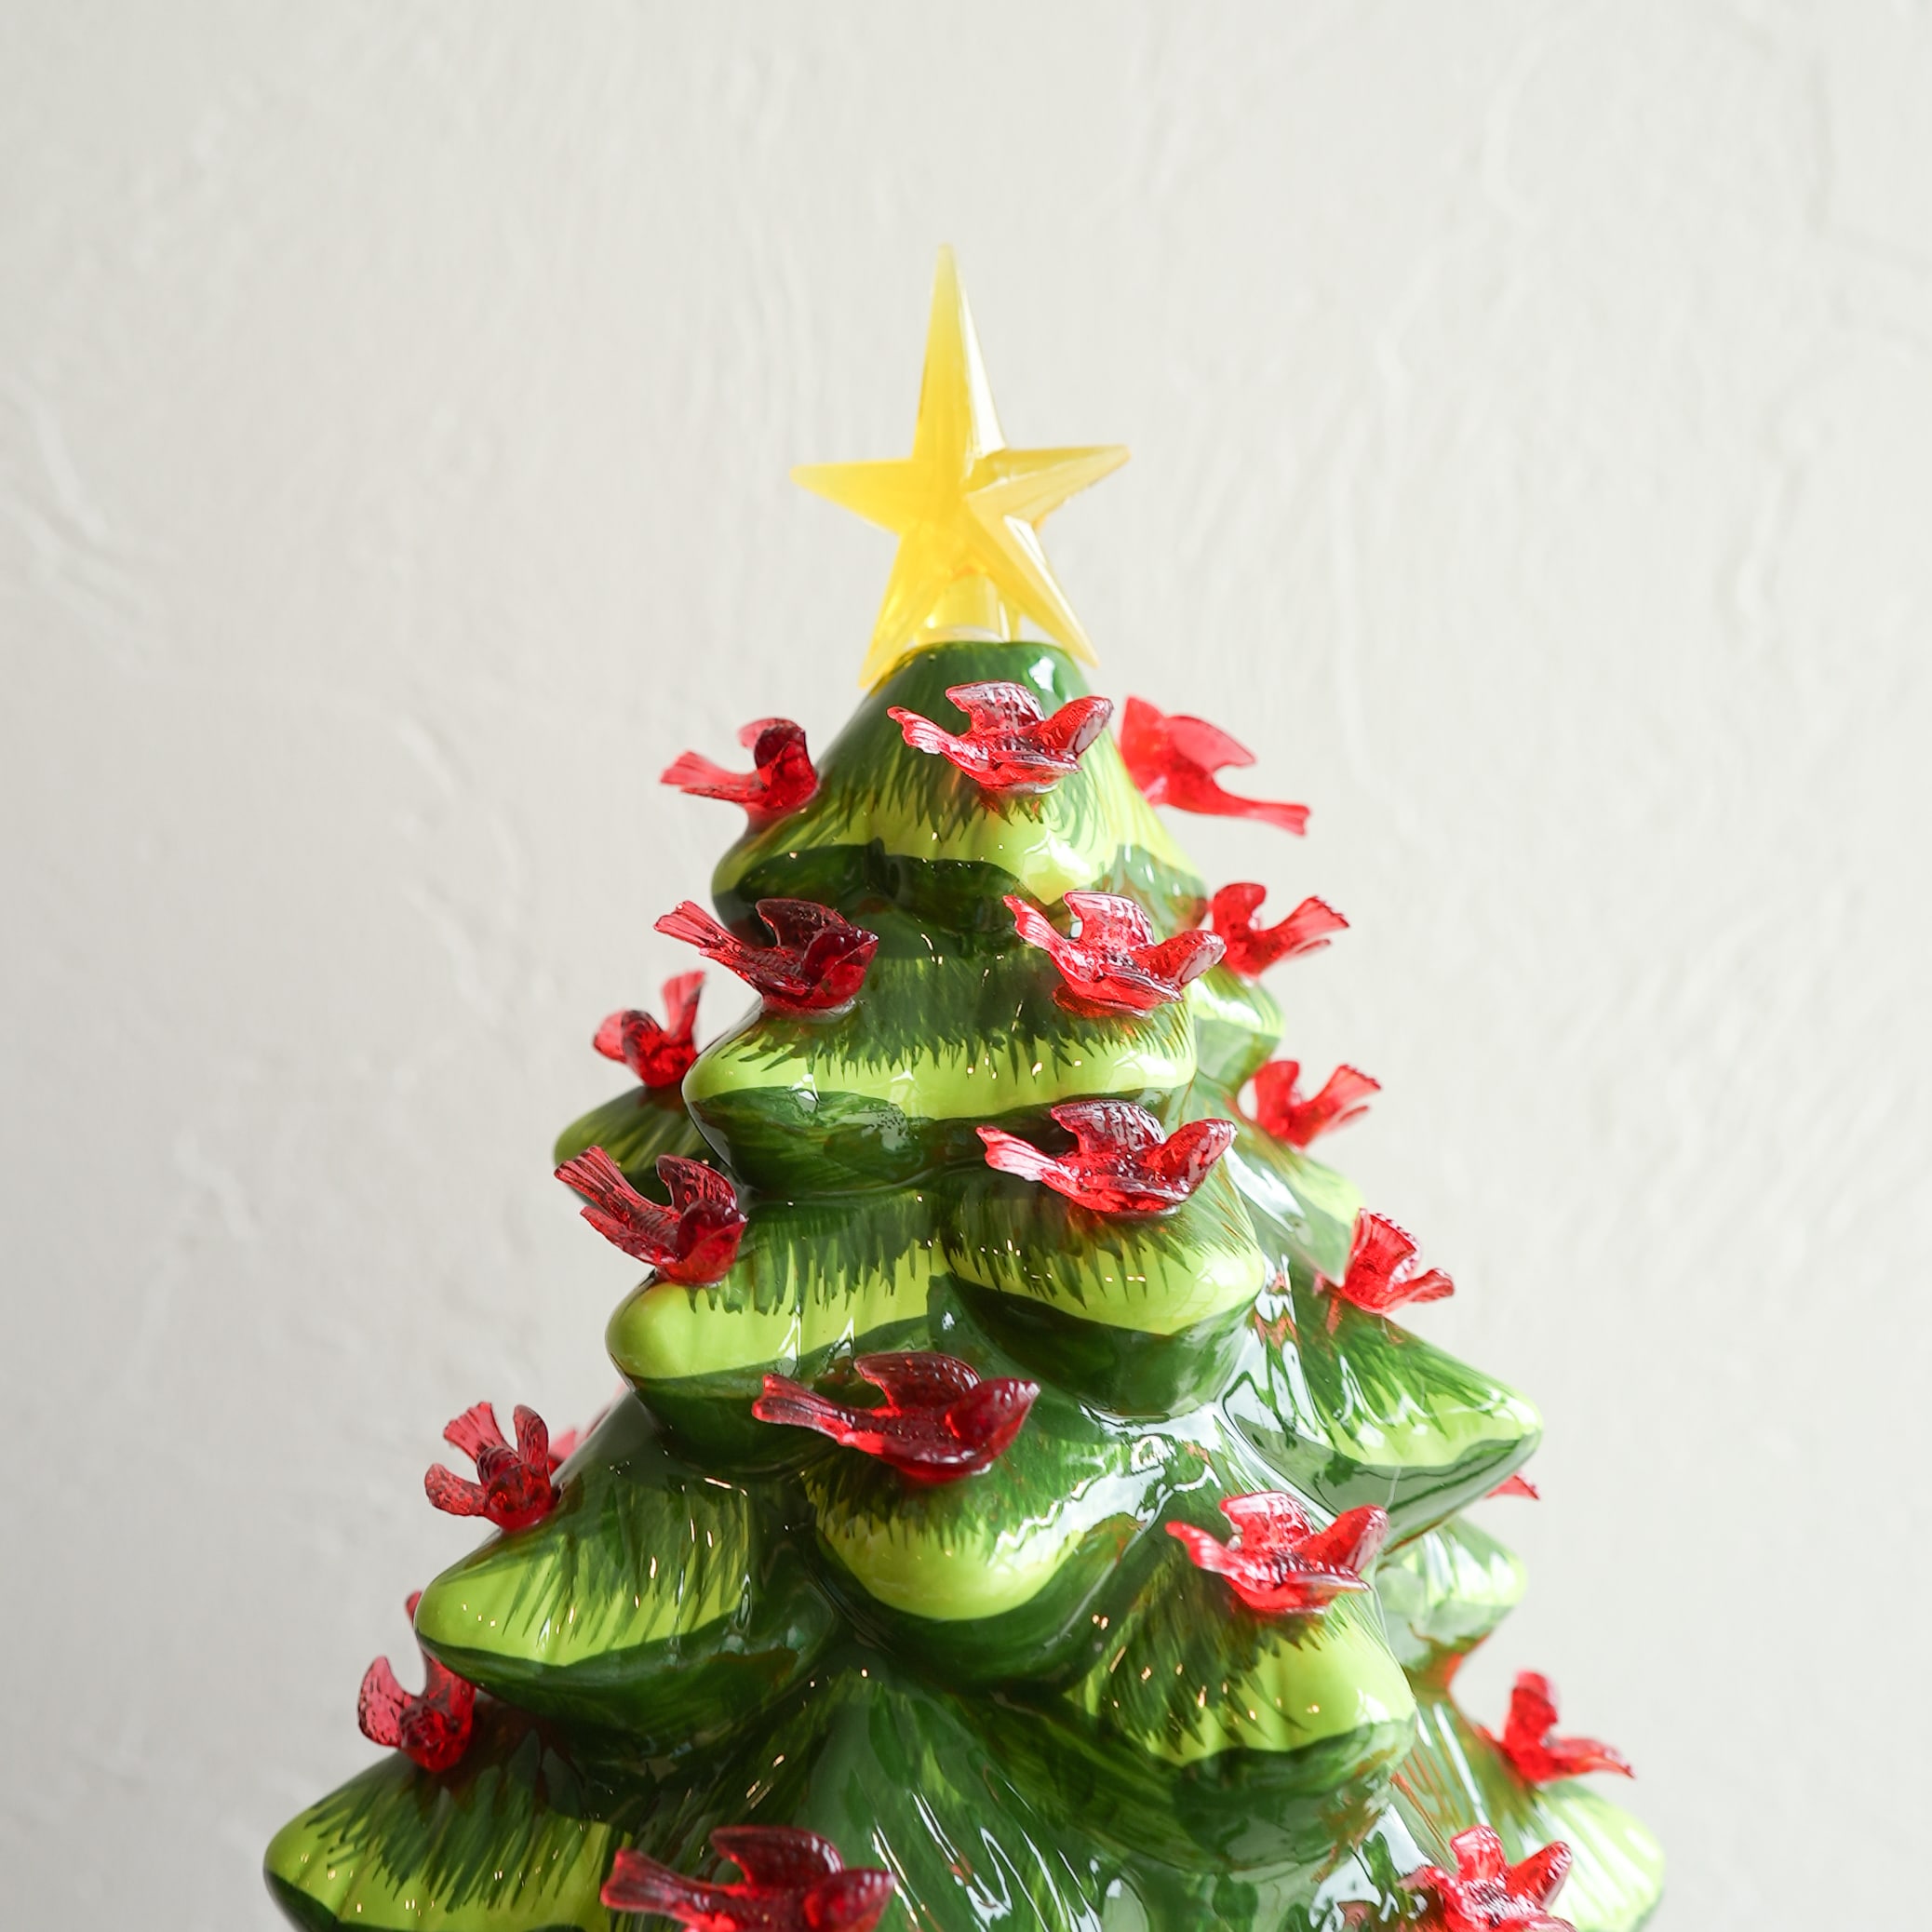 This Pretty Ceramic Christmas Tree Was Made for Cardinal Lovers